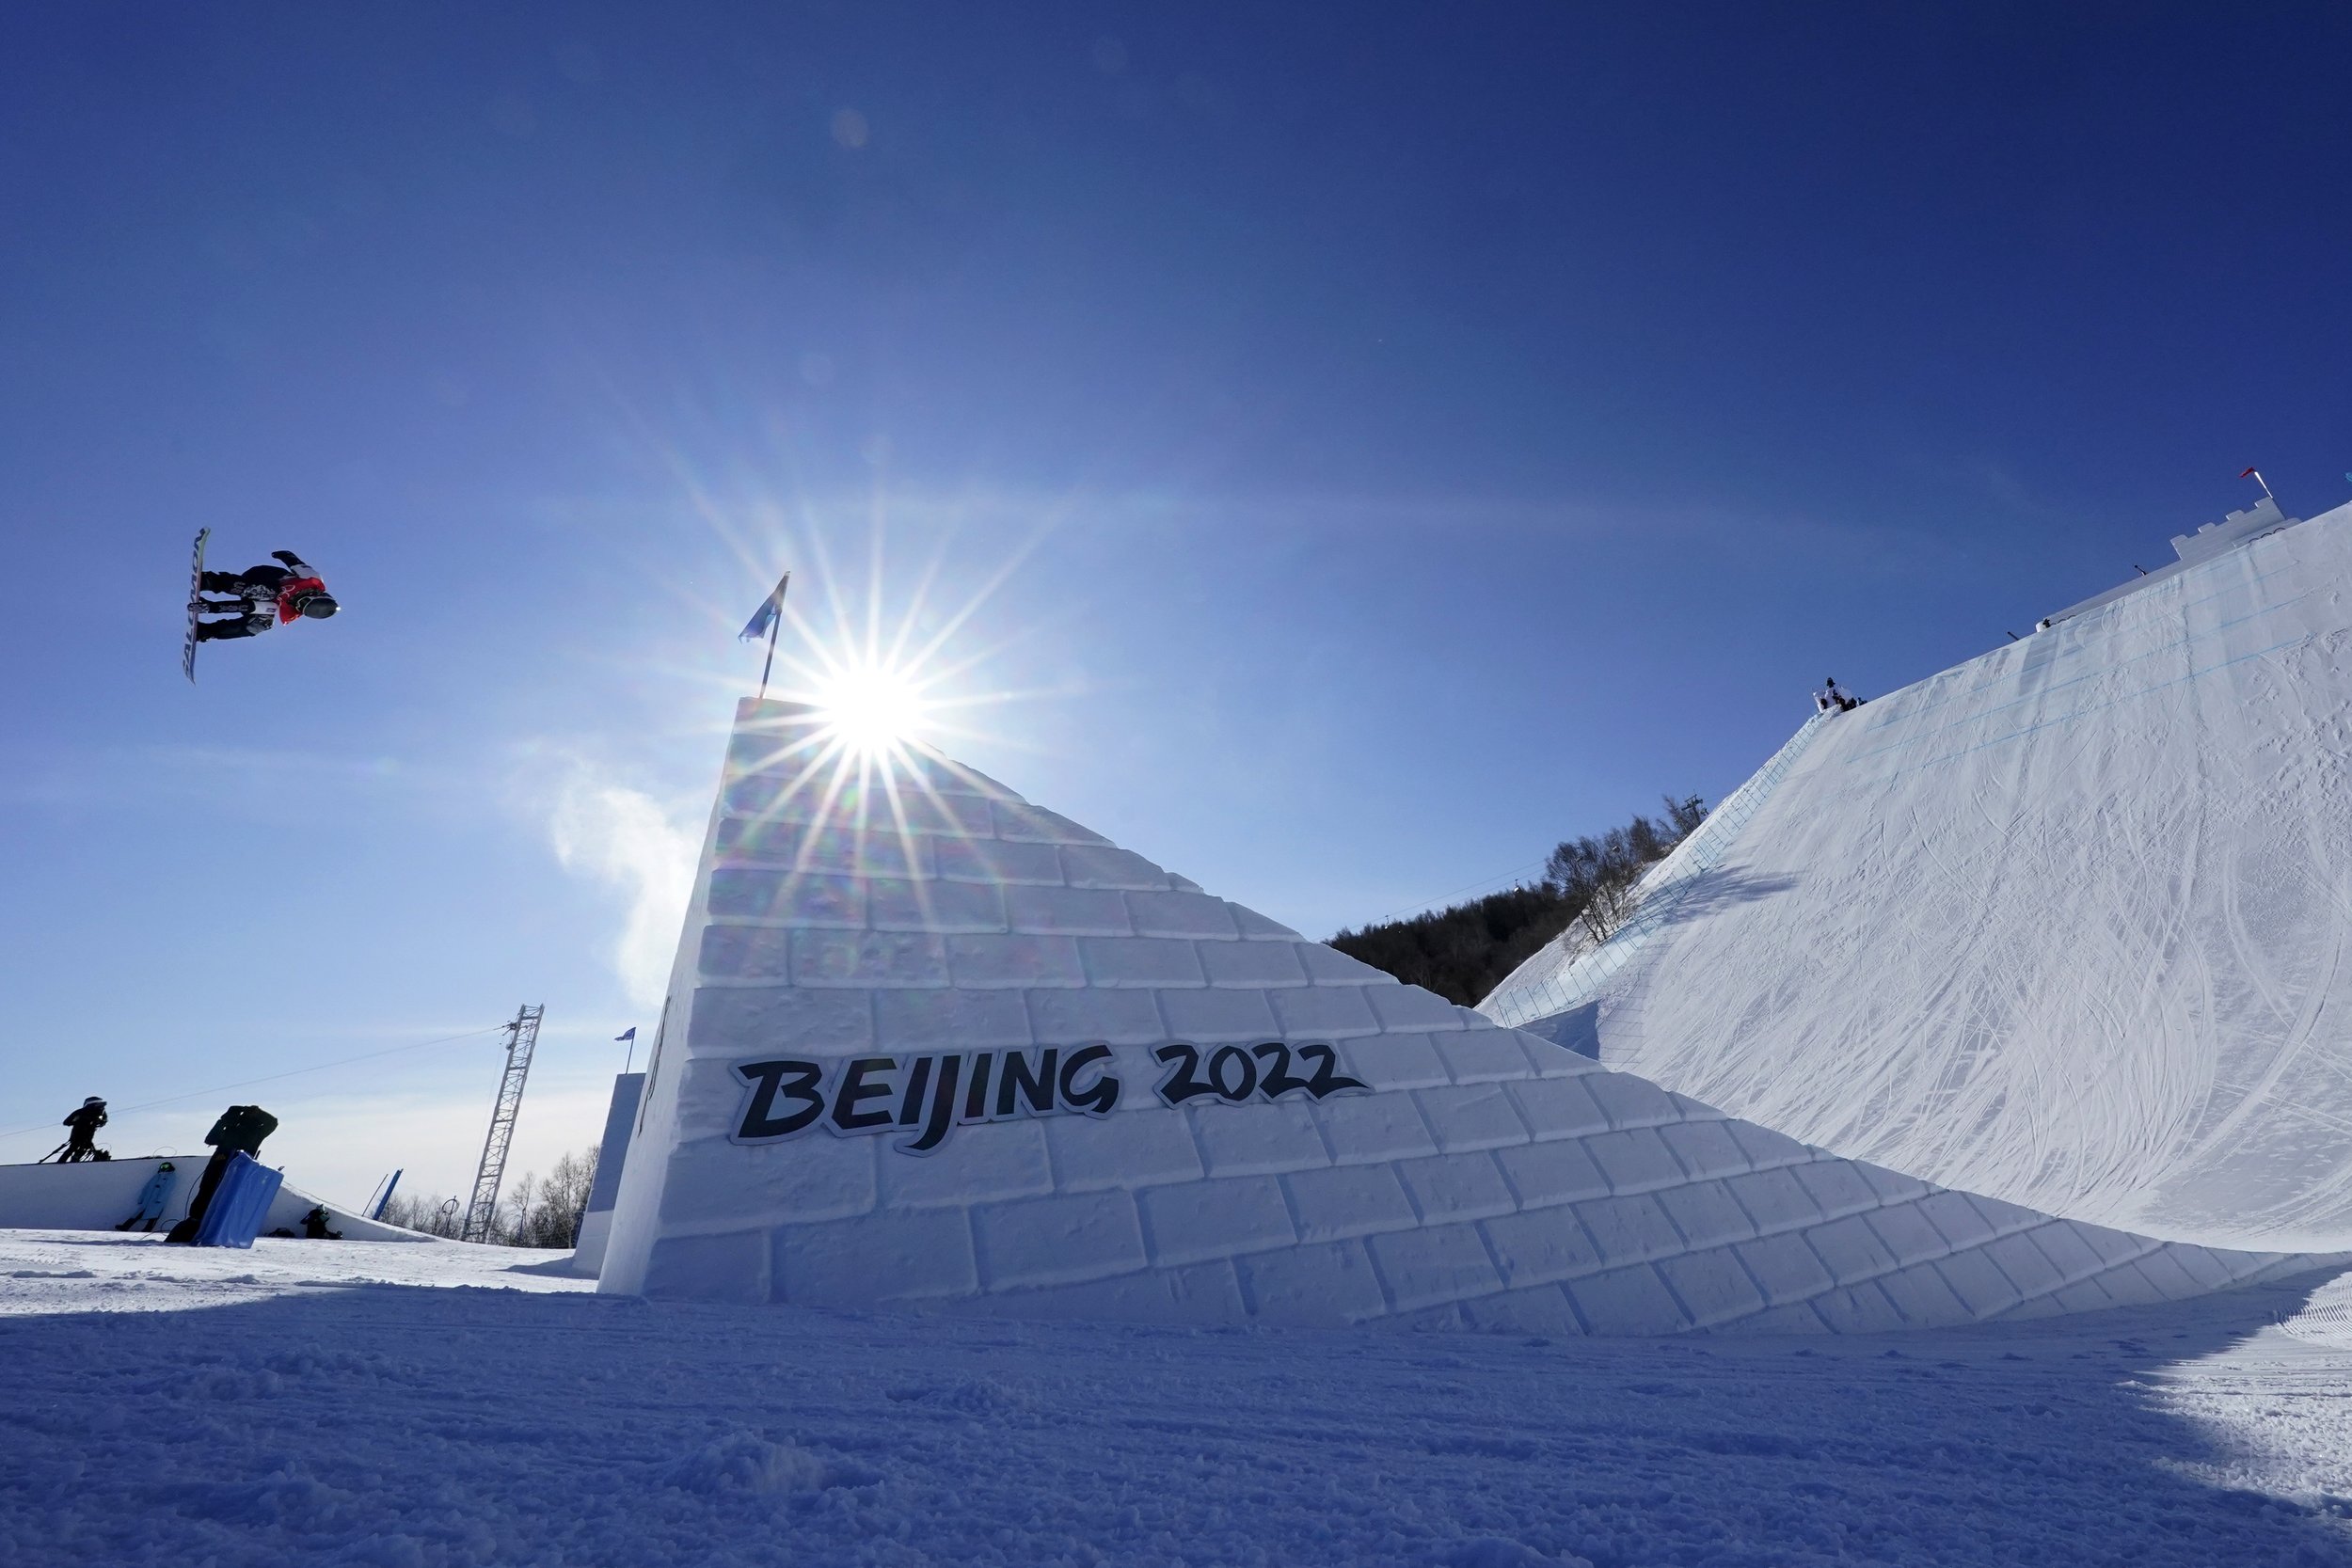  United States' Hailey Langland competes during the women's slopestyle finals at the 2022 Winter Olympics, Sunday, Feb. 6, 2022, in Zhangjiakou, China. (AP Photo/Gregory Bull) 